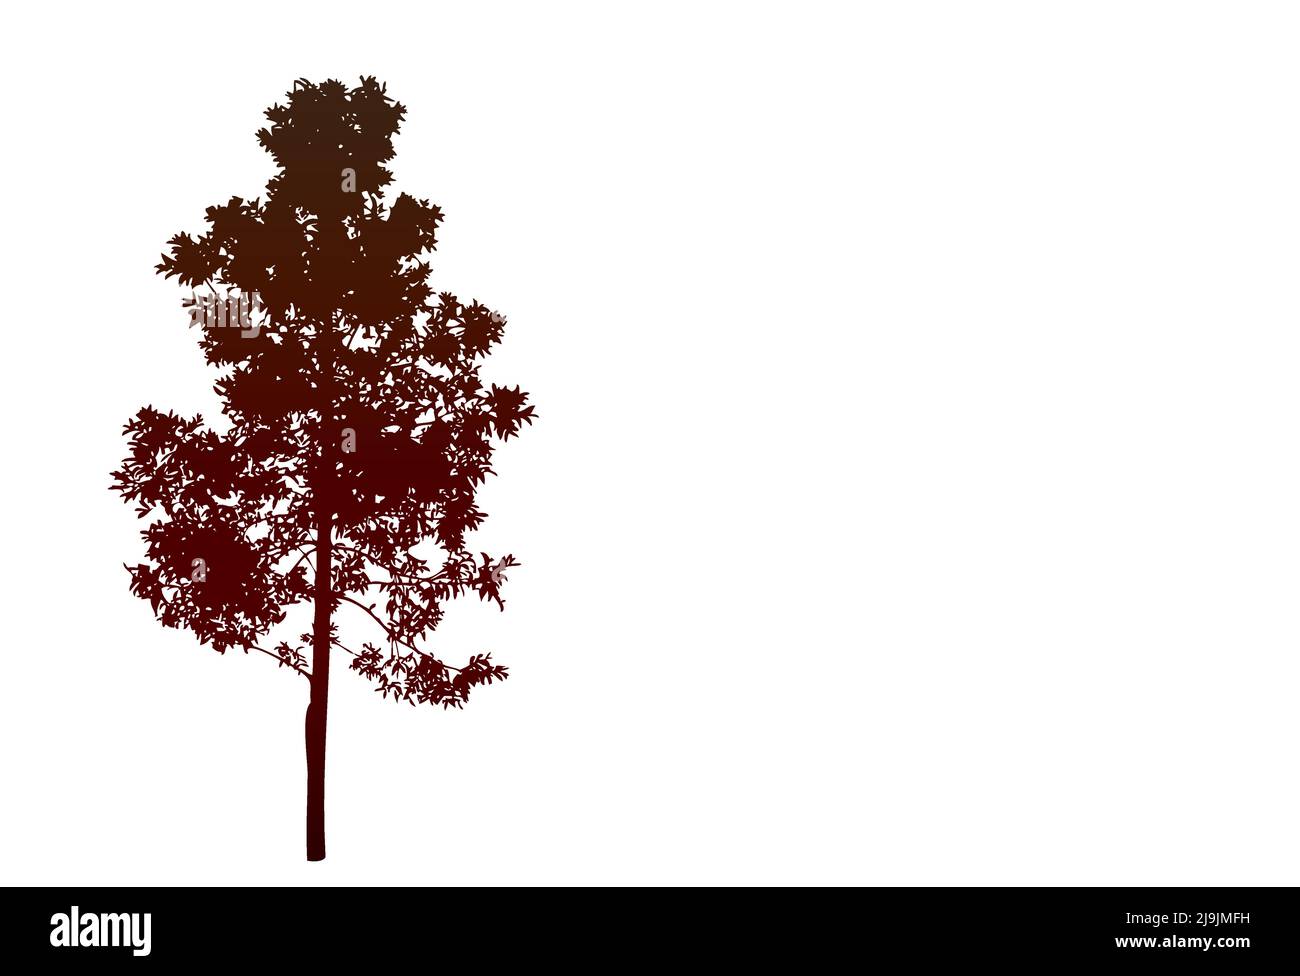 single silhouette of a tree in brown tones and white background Stock Vector